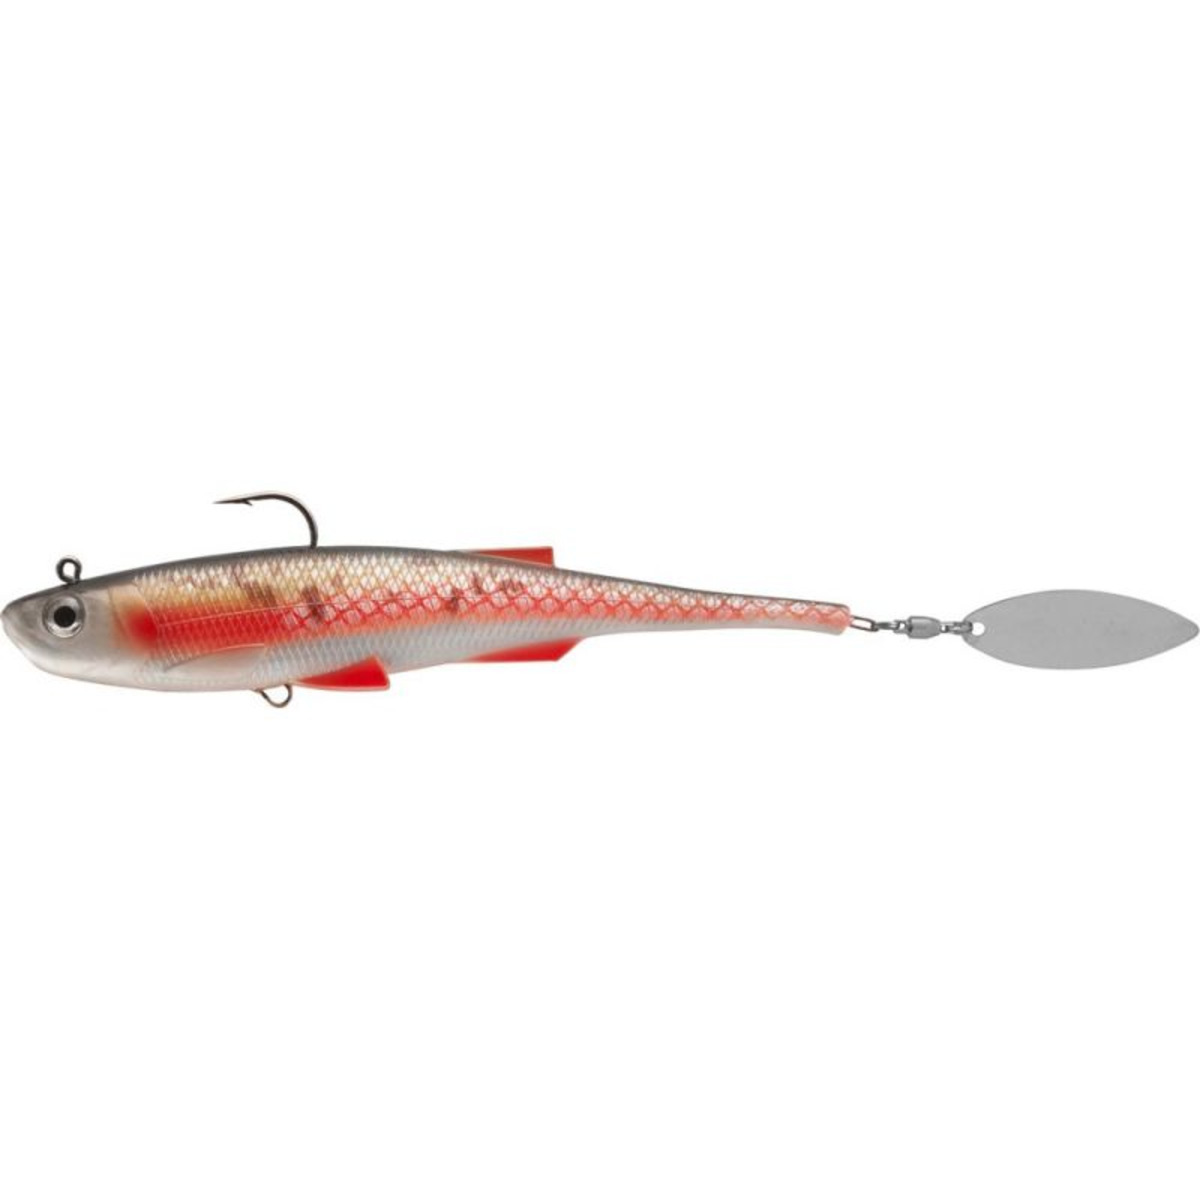 Rapture Mad Spintail Shad - 20.0 g - 100 mm - RC